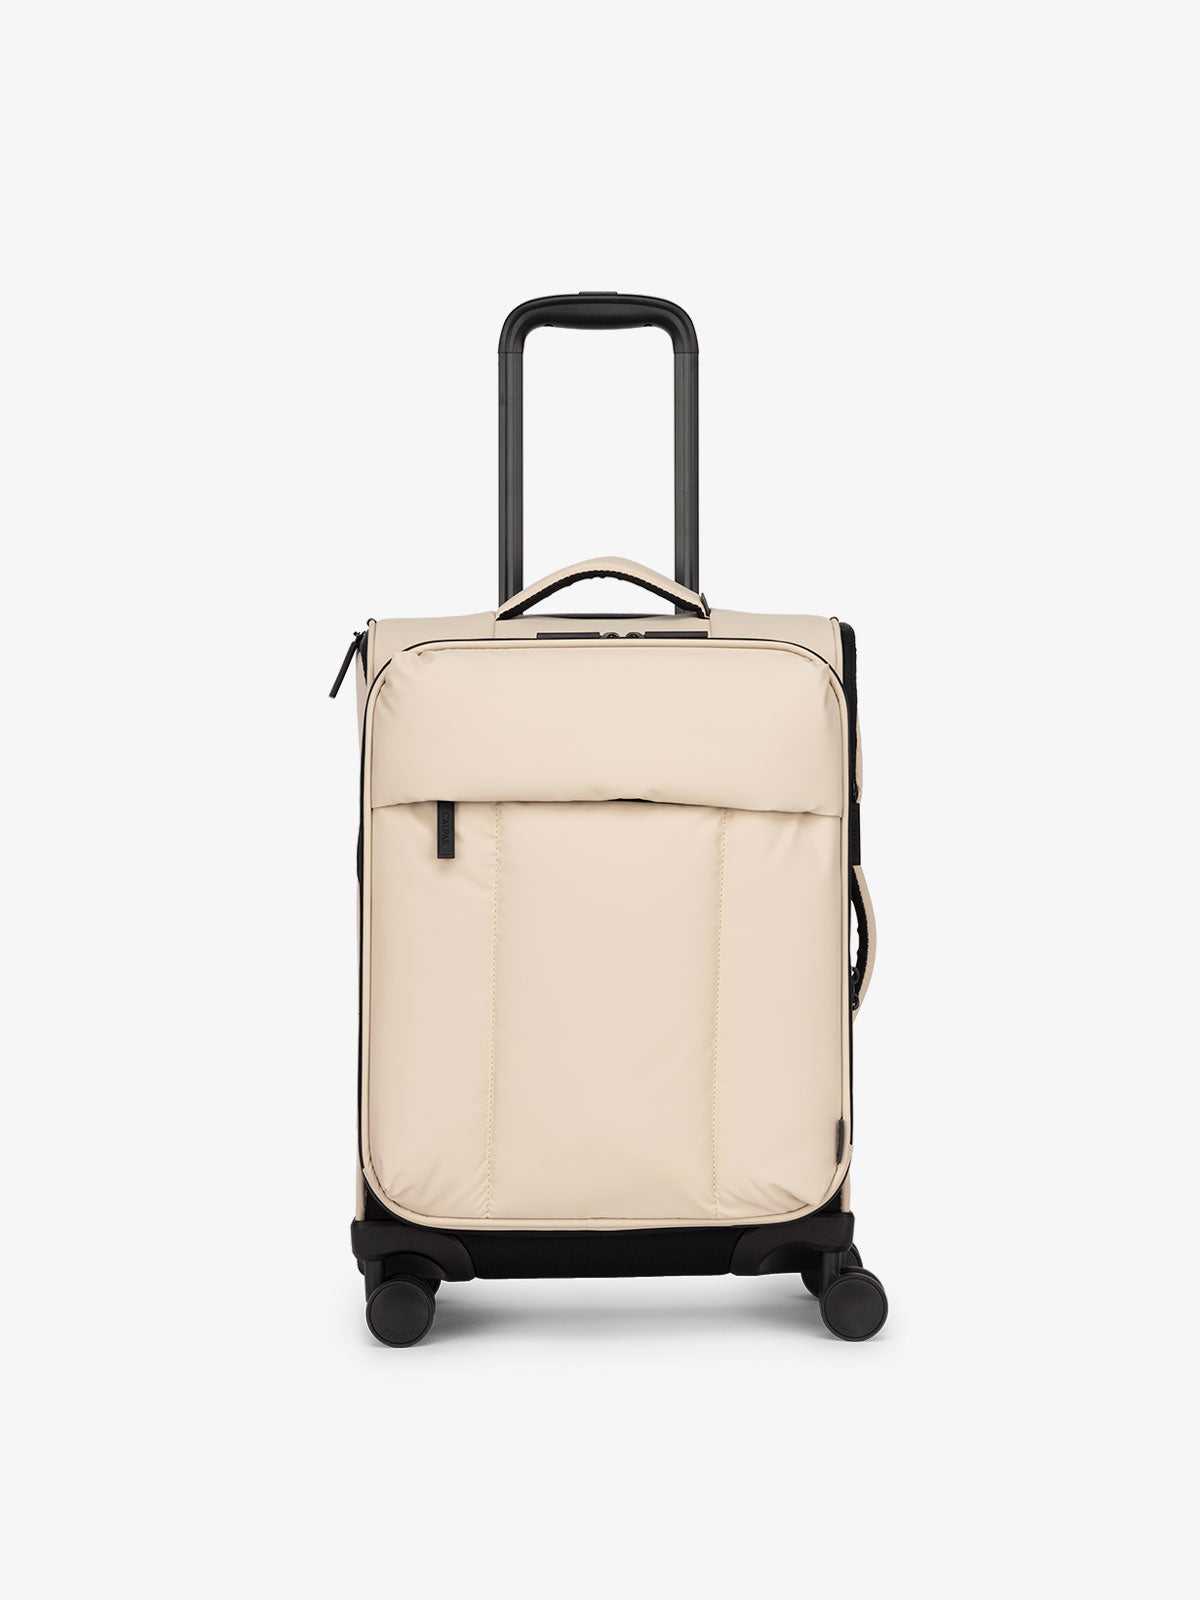 CALPAK Luka Soft-Sided Carry-On Luggage in Oatmeal | 20"